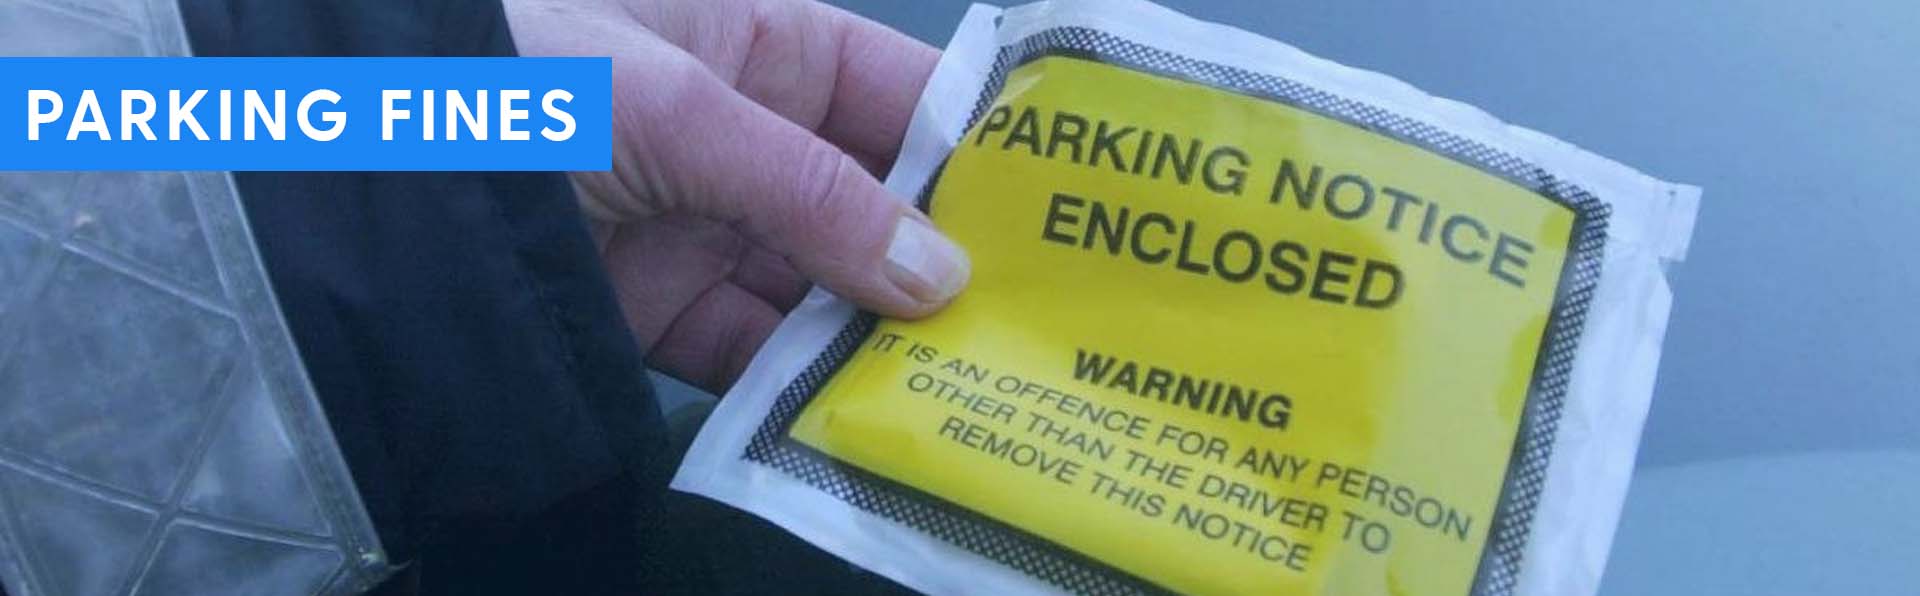 Impact of Reintroduced Parking Charges on NHS Workers: A Study on Parking Fine Trends 